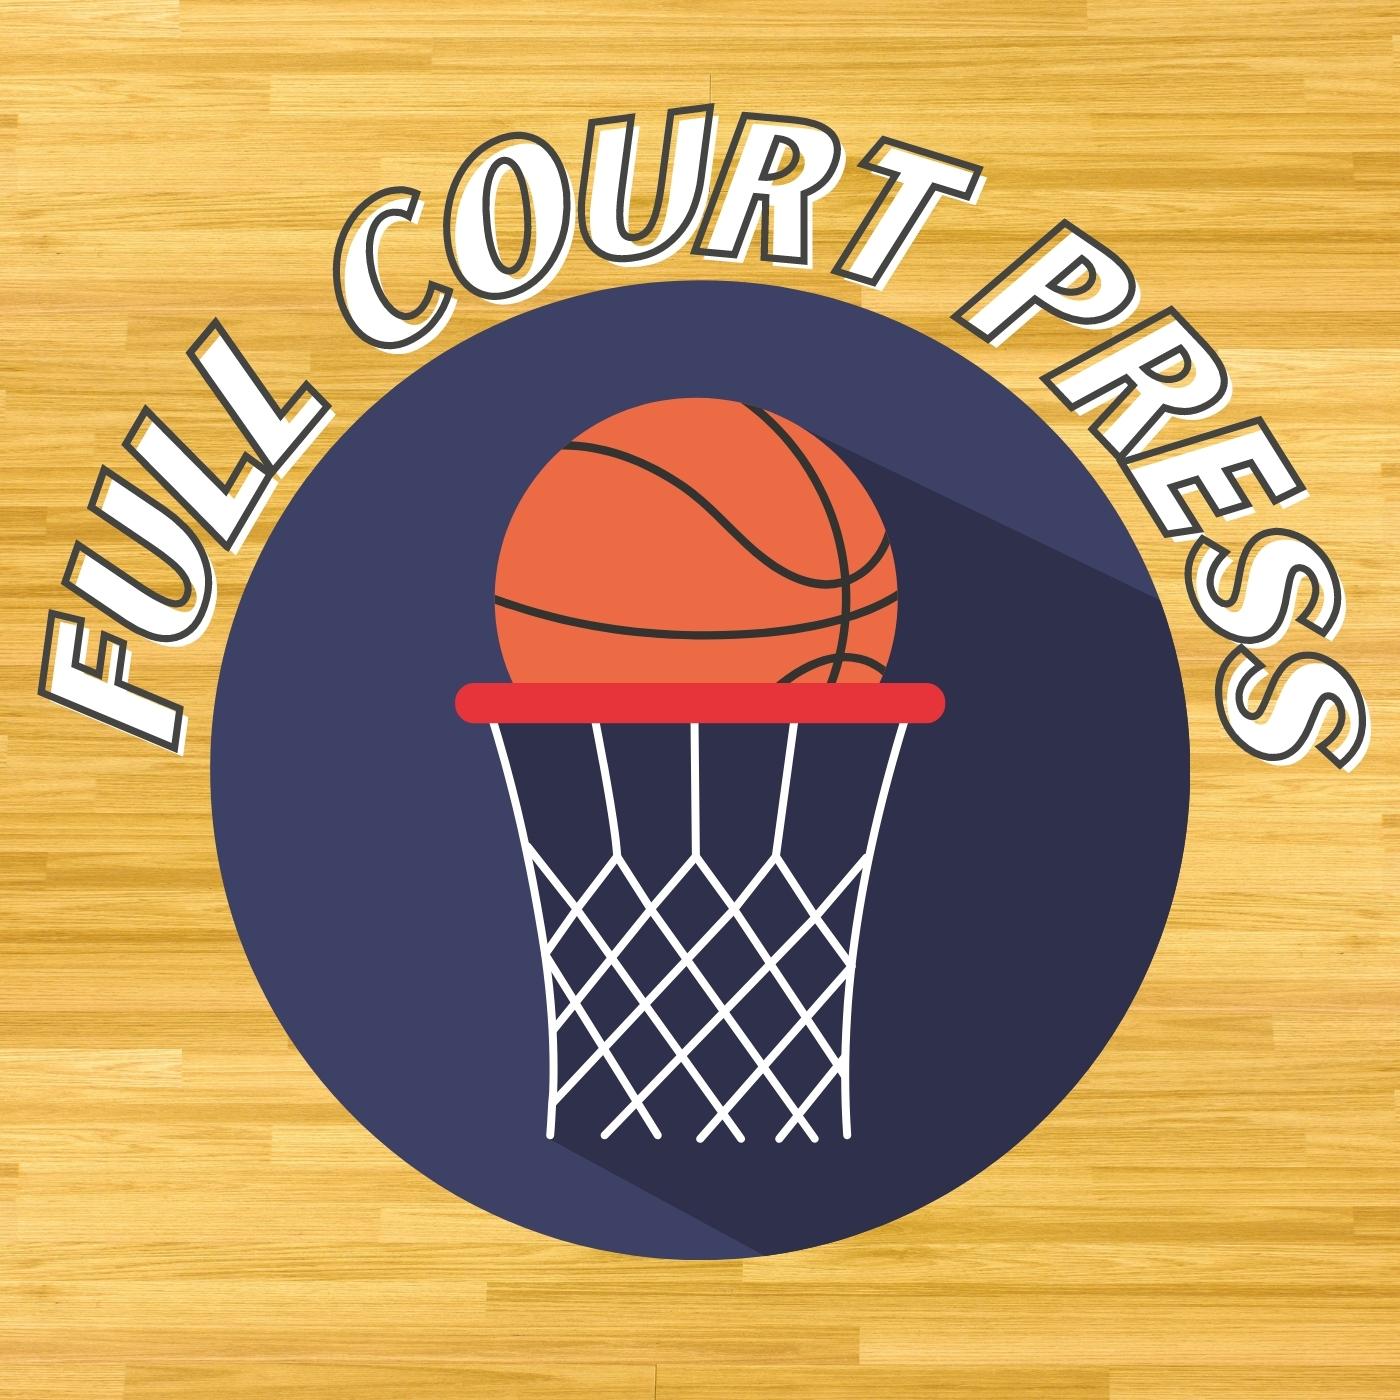 Full Court Press S02.E19 - NBA Western Conference Playoff Predictions